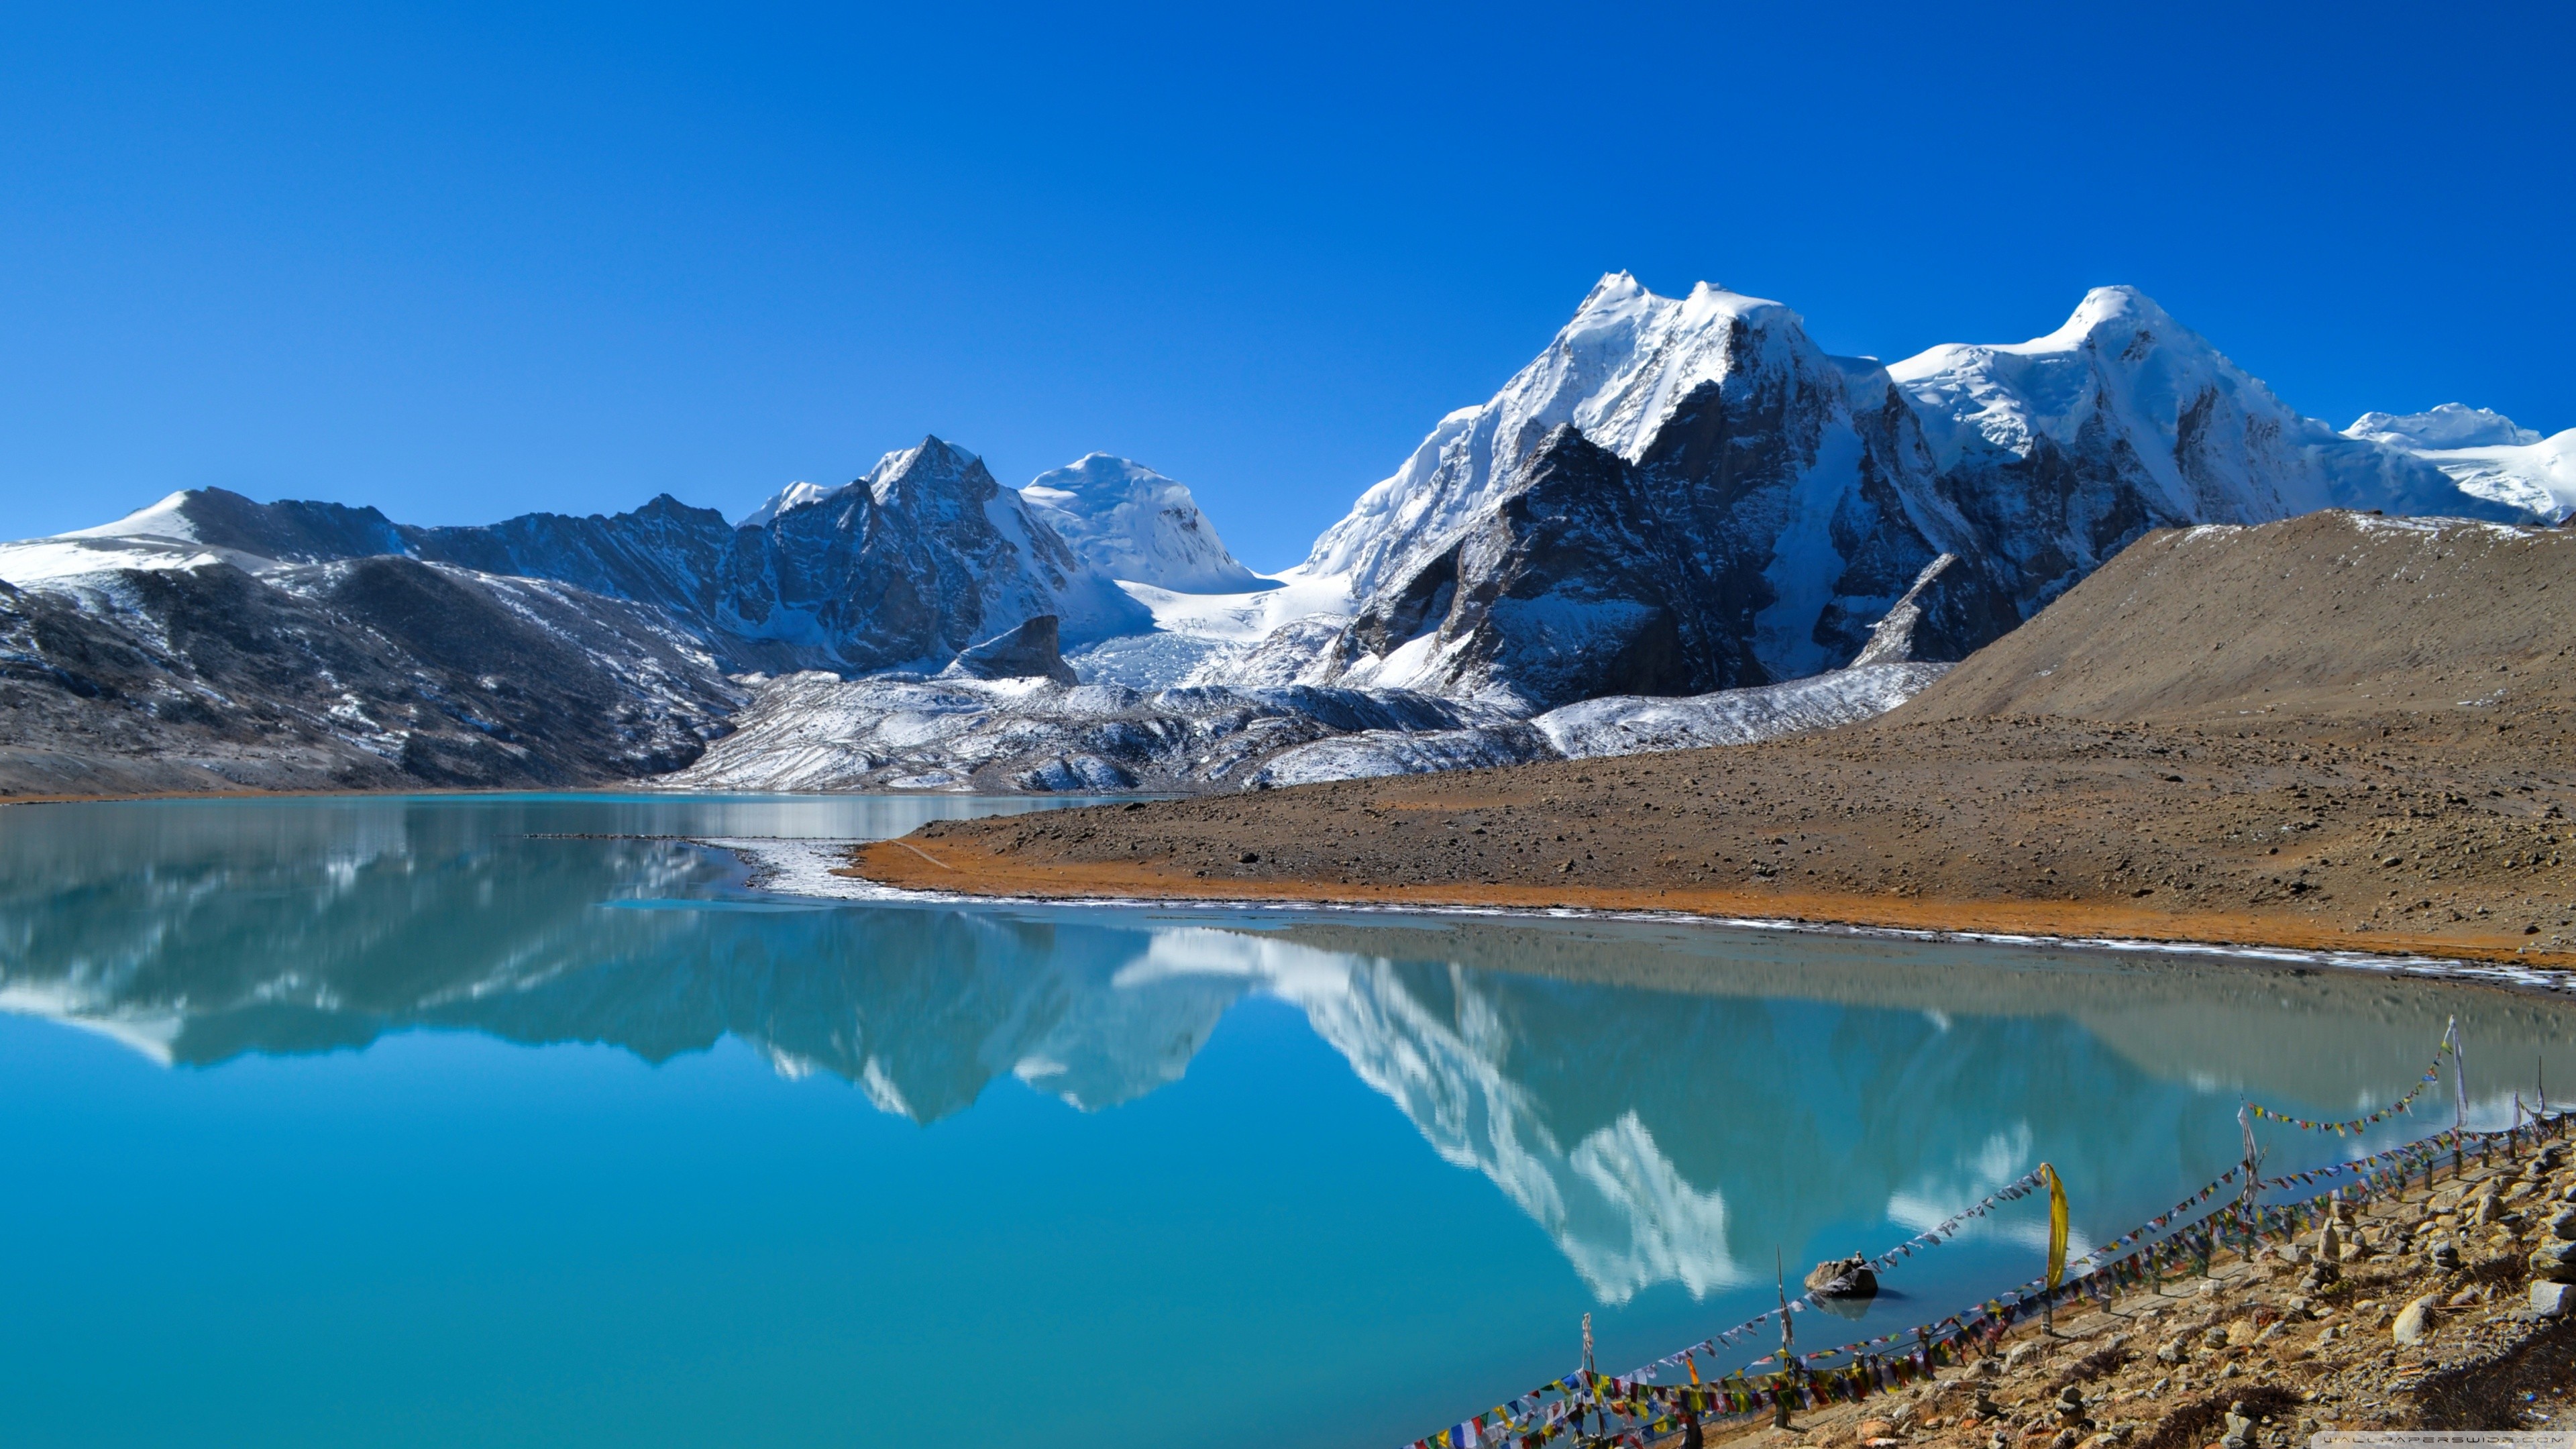 General 3840x2160 mountains lake snow landscape nature water reflection outdoors snowy peak sky